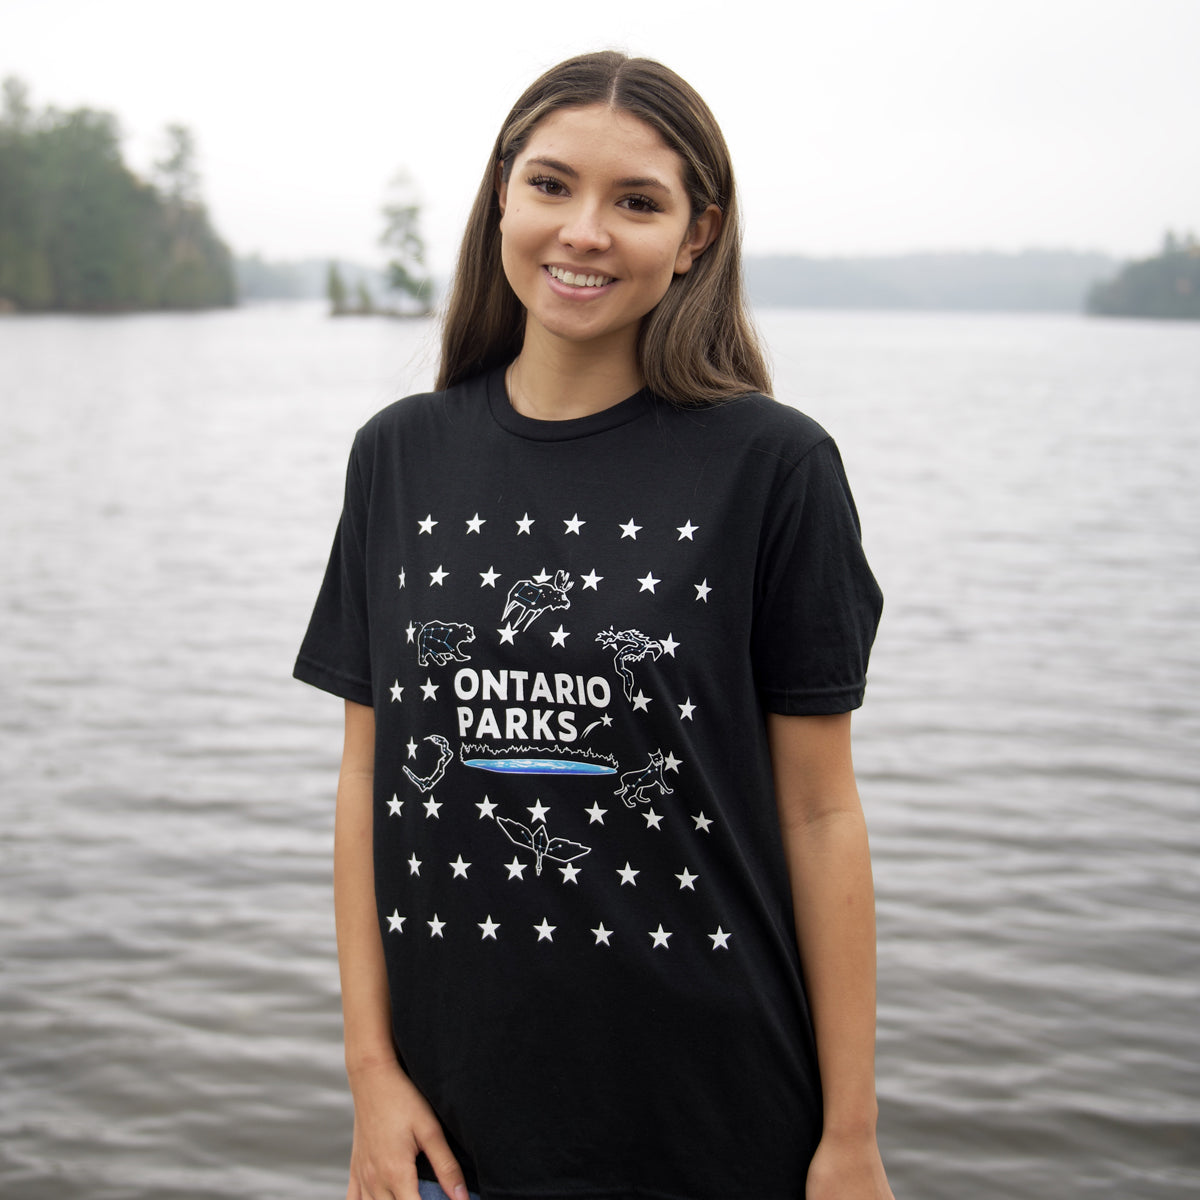 woman standing in front of body of water wearing Ontario Parks black t shirt with stars, star constellations, star patterns 